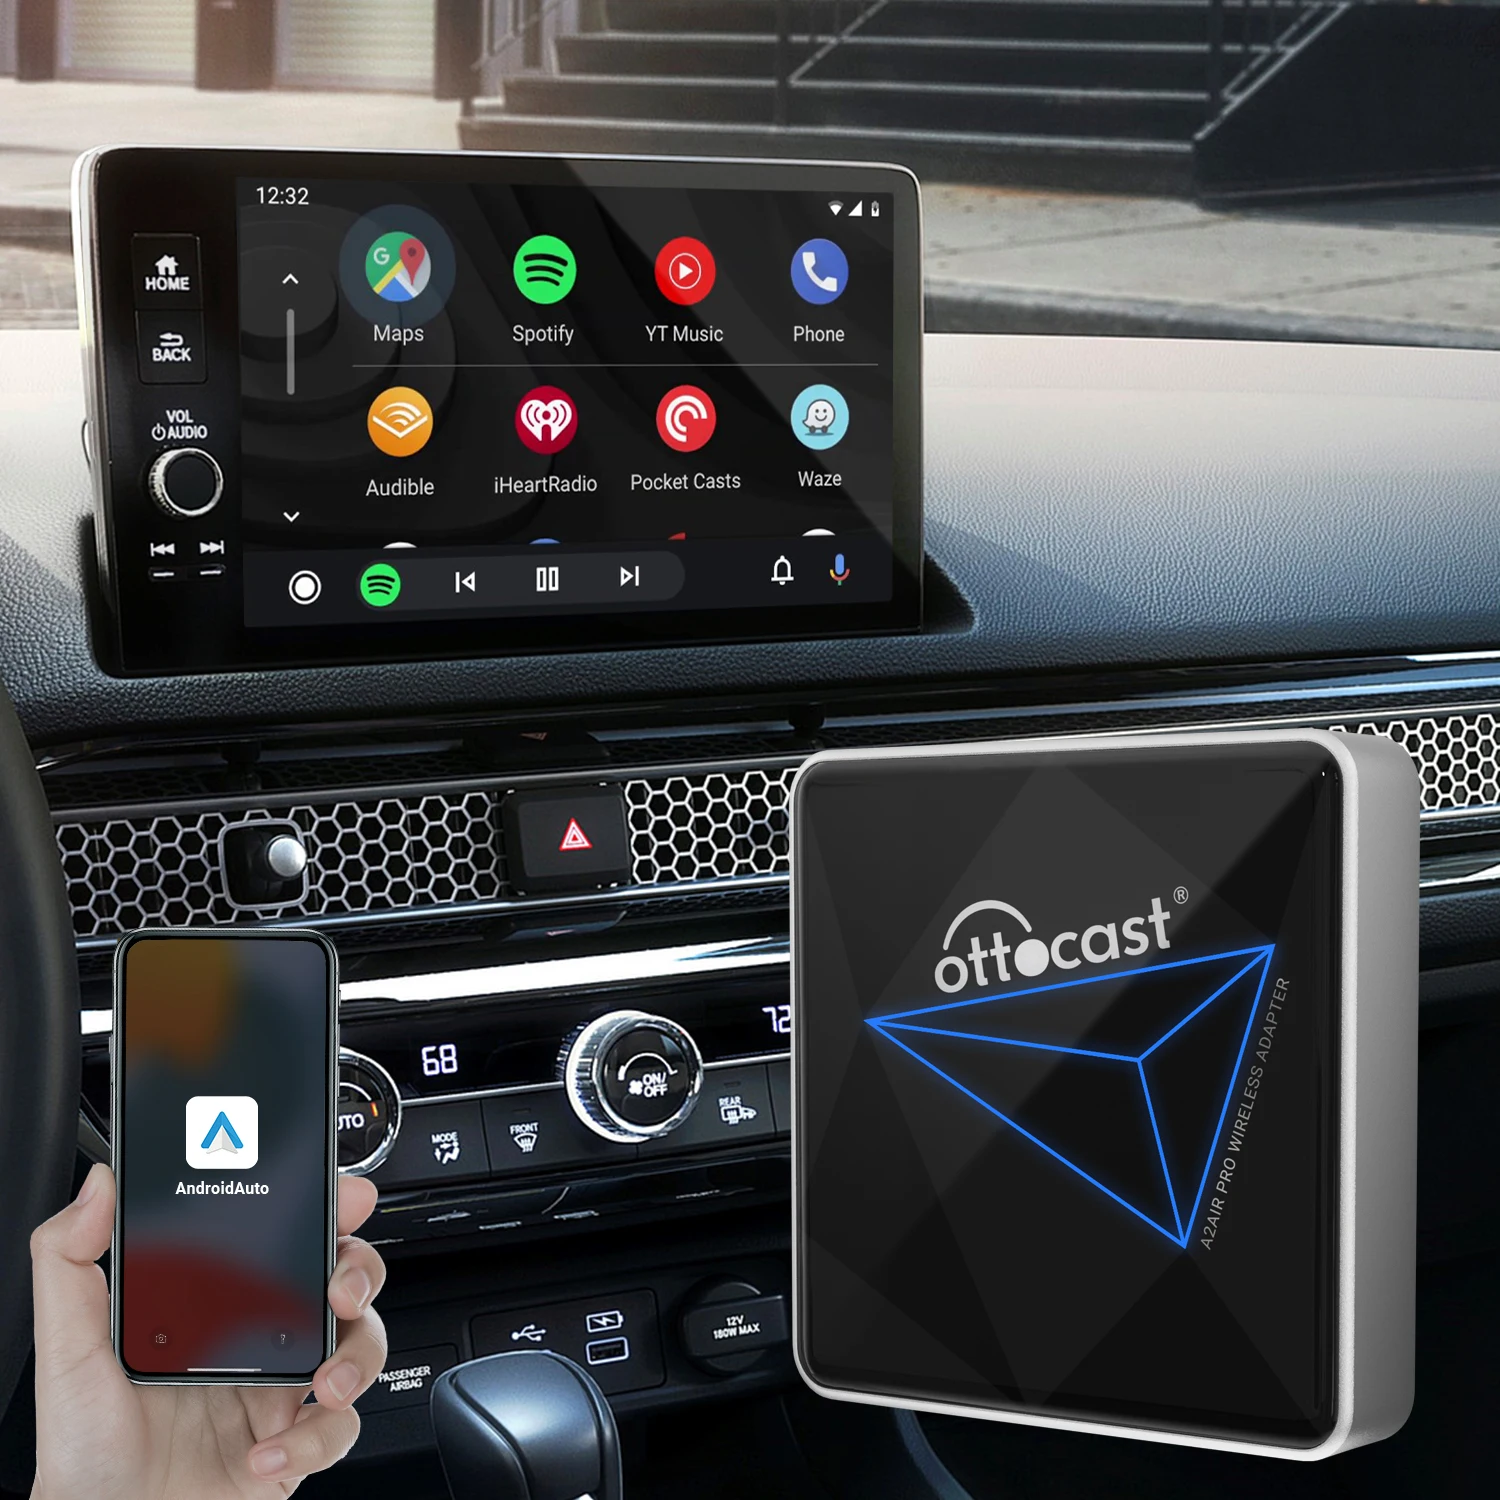 Ottocast  A2Air Android Auto wireless adapter 